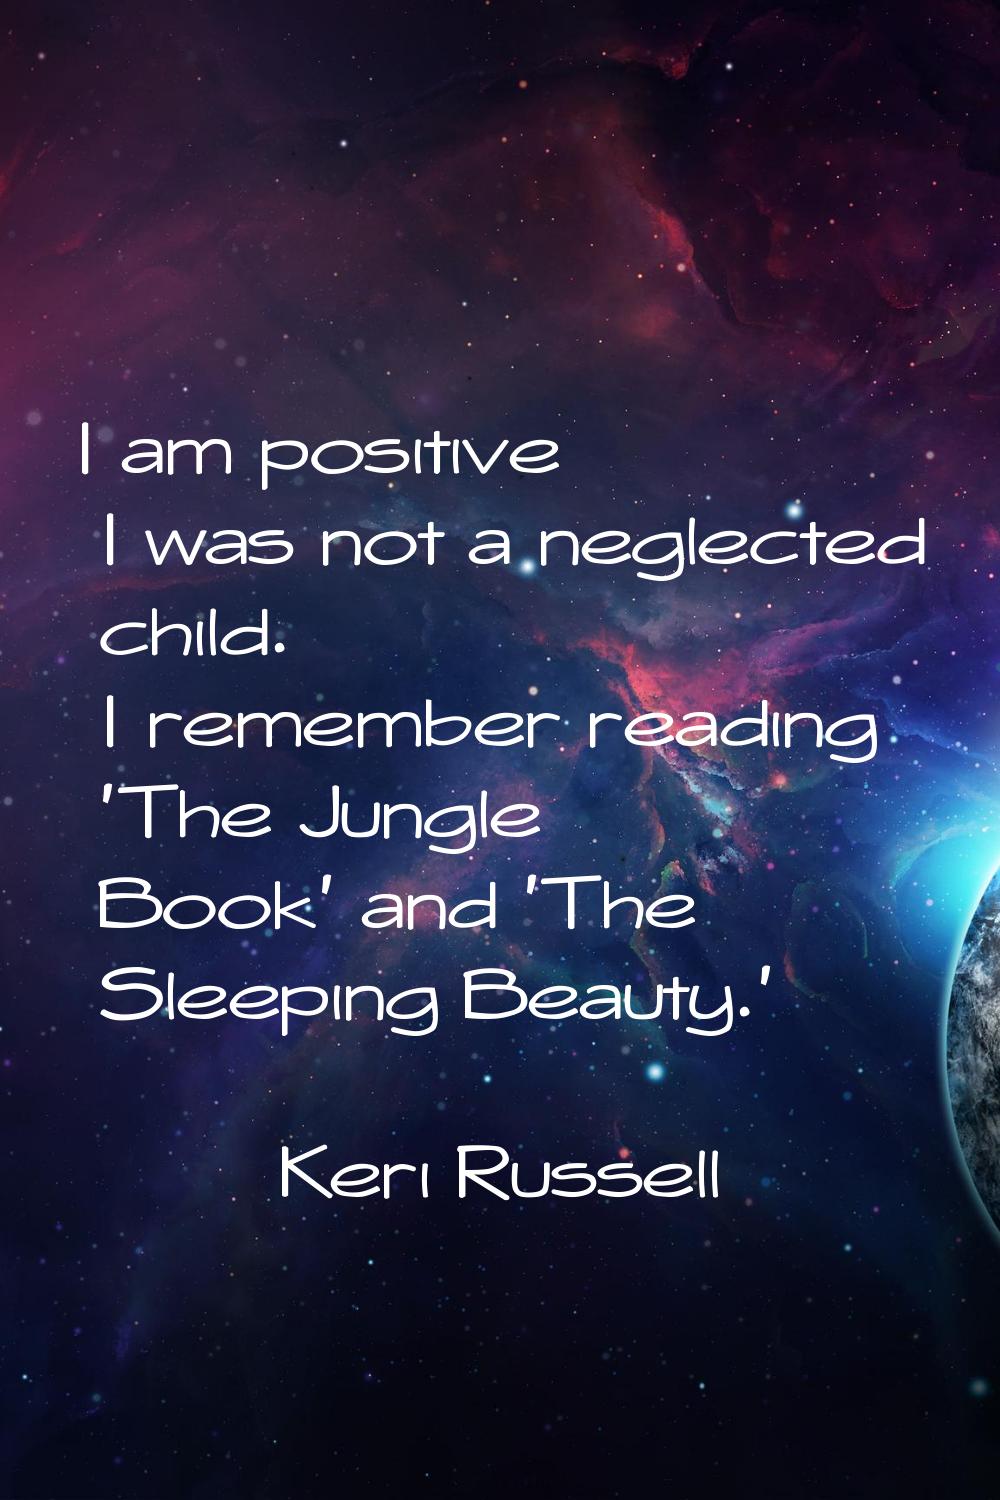 I am positive I was not a neglected child. I remember reading 'The Jungle Book' and 'The Sleeping B